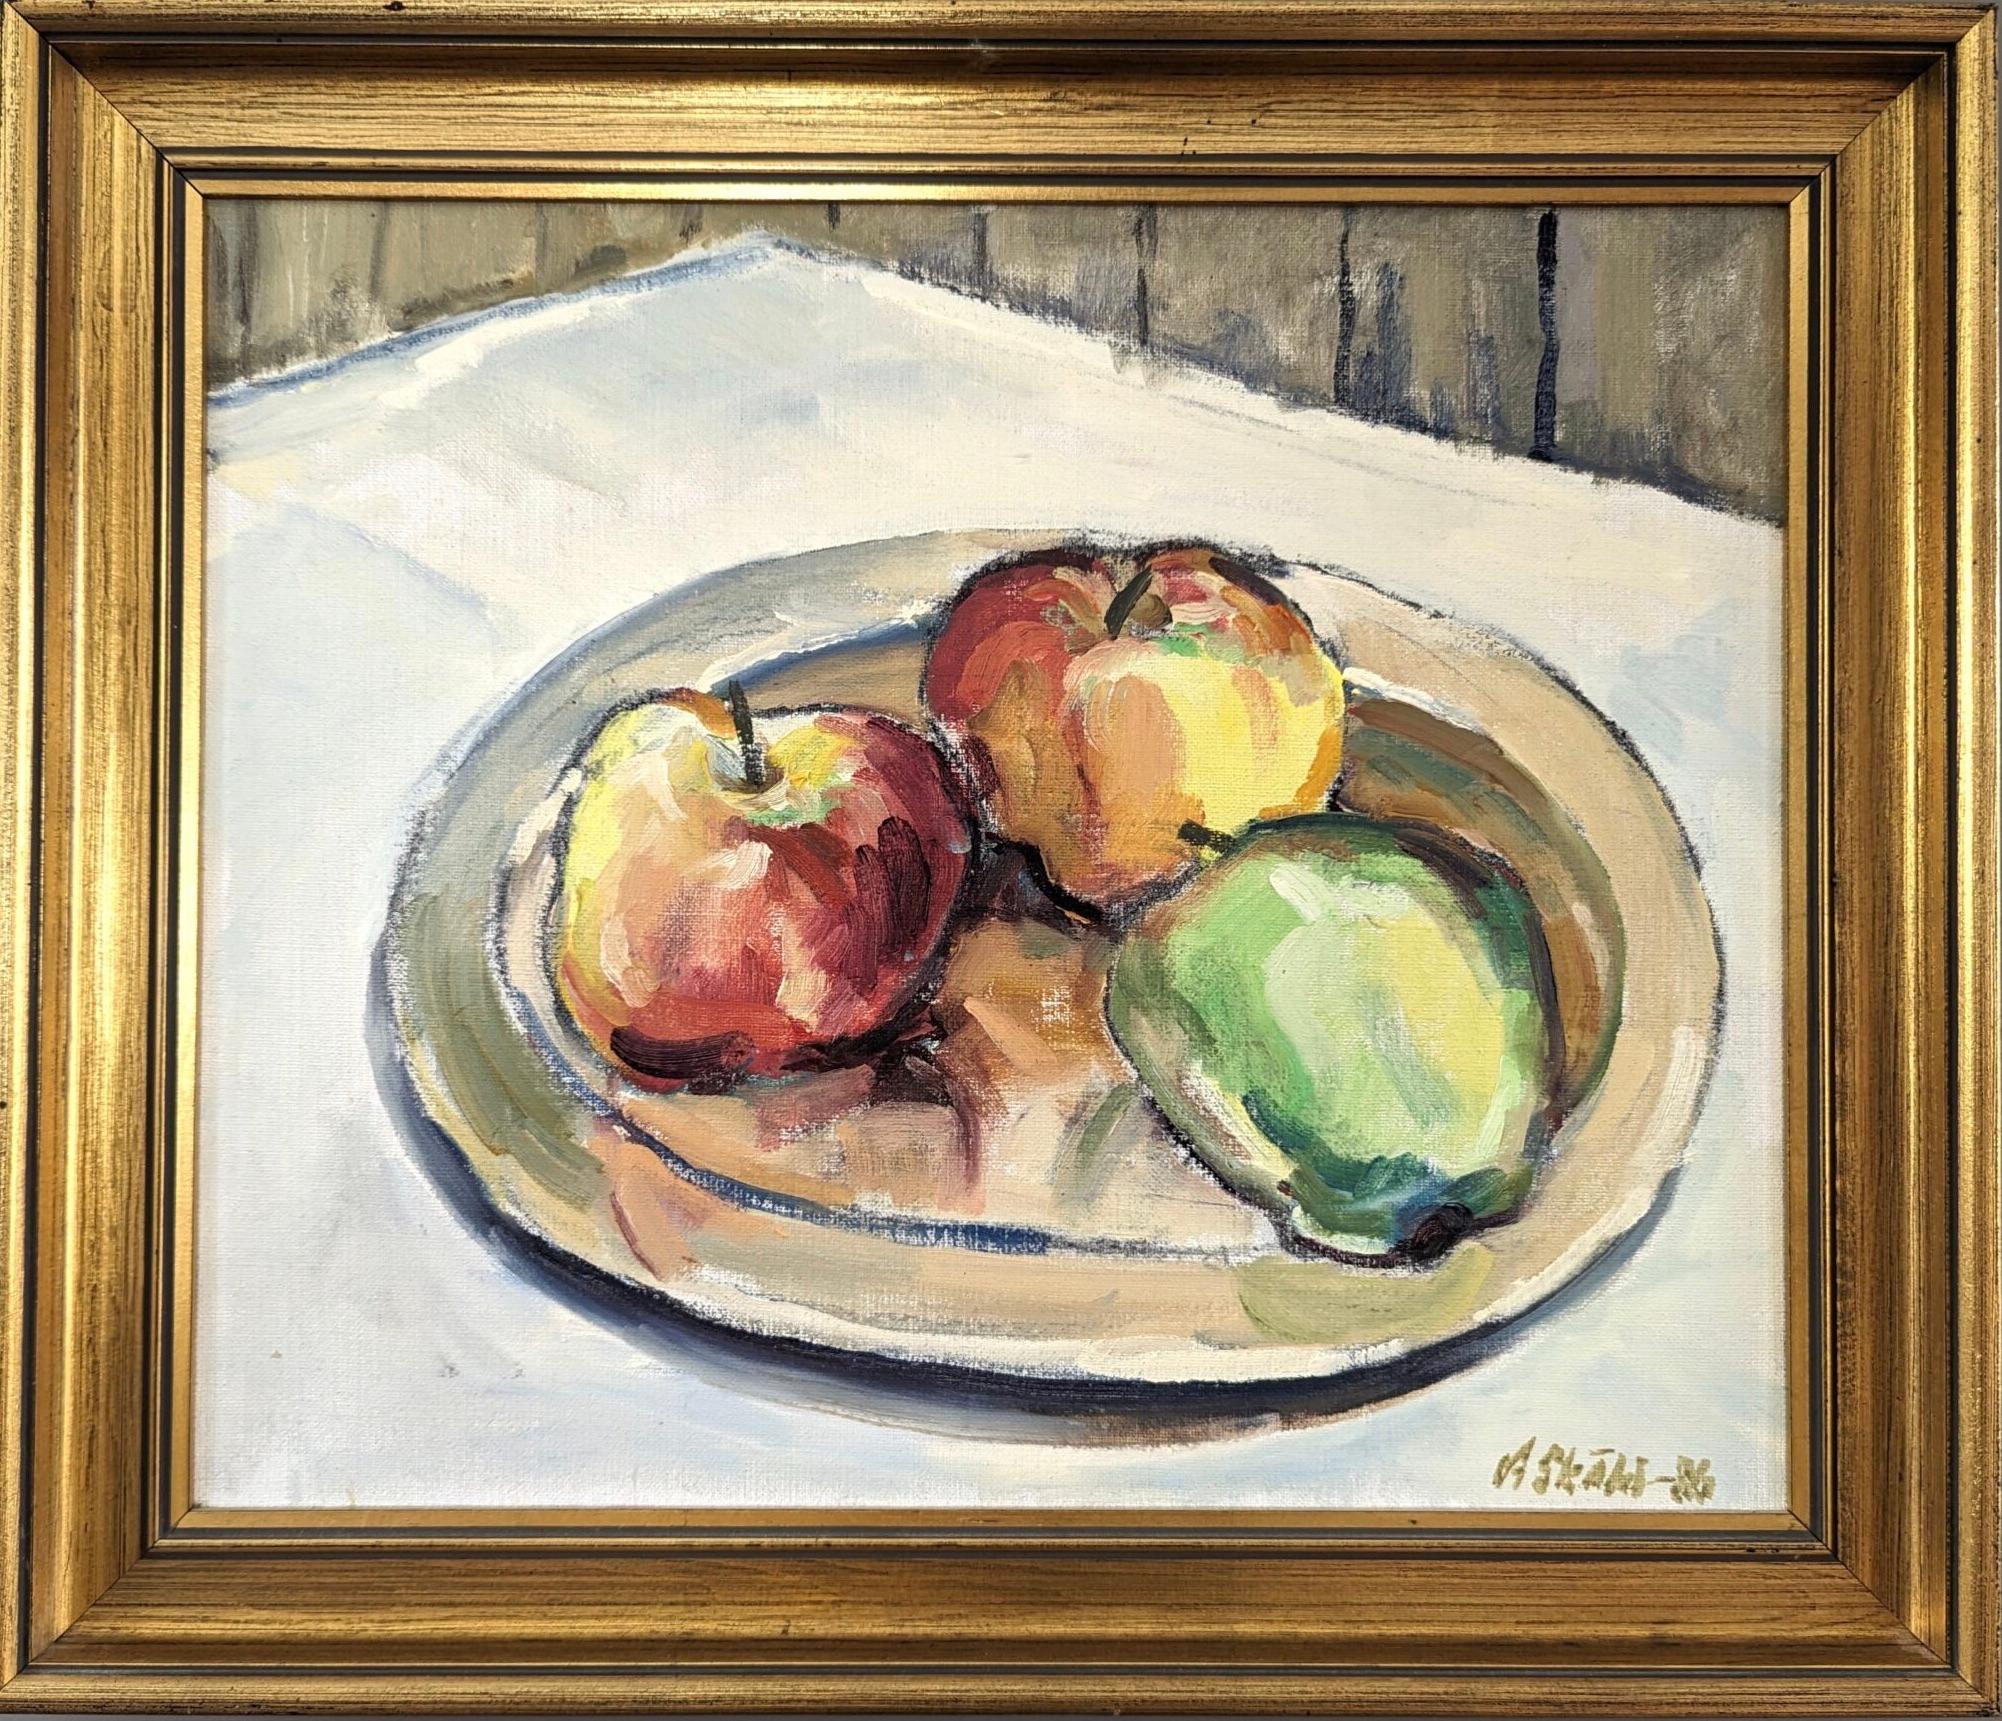 Unknown Still-Life Painting - 1986 Vintage Modern Still Life Oil Painting - Orchard Apples